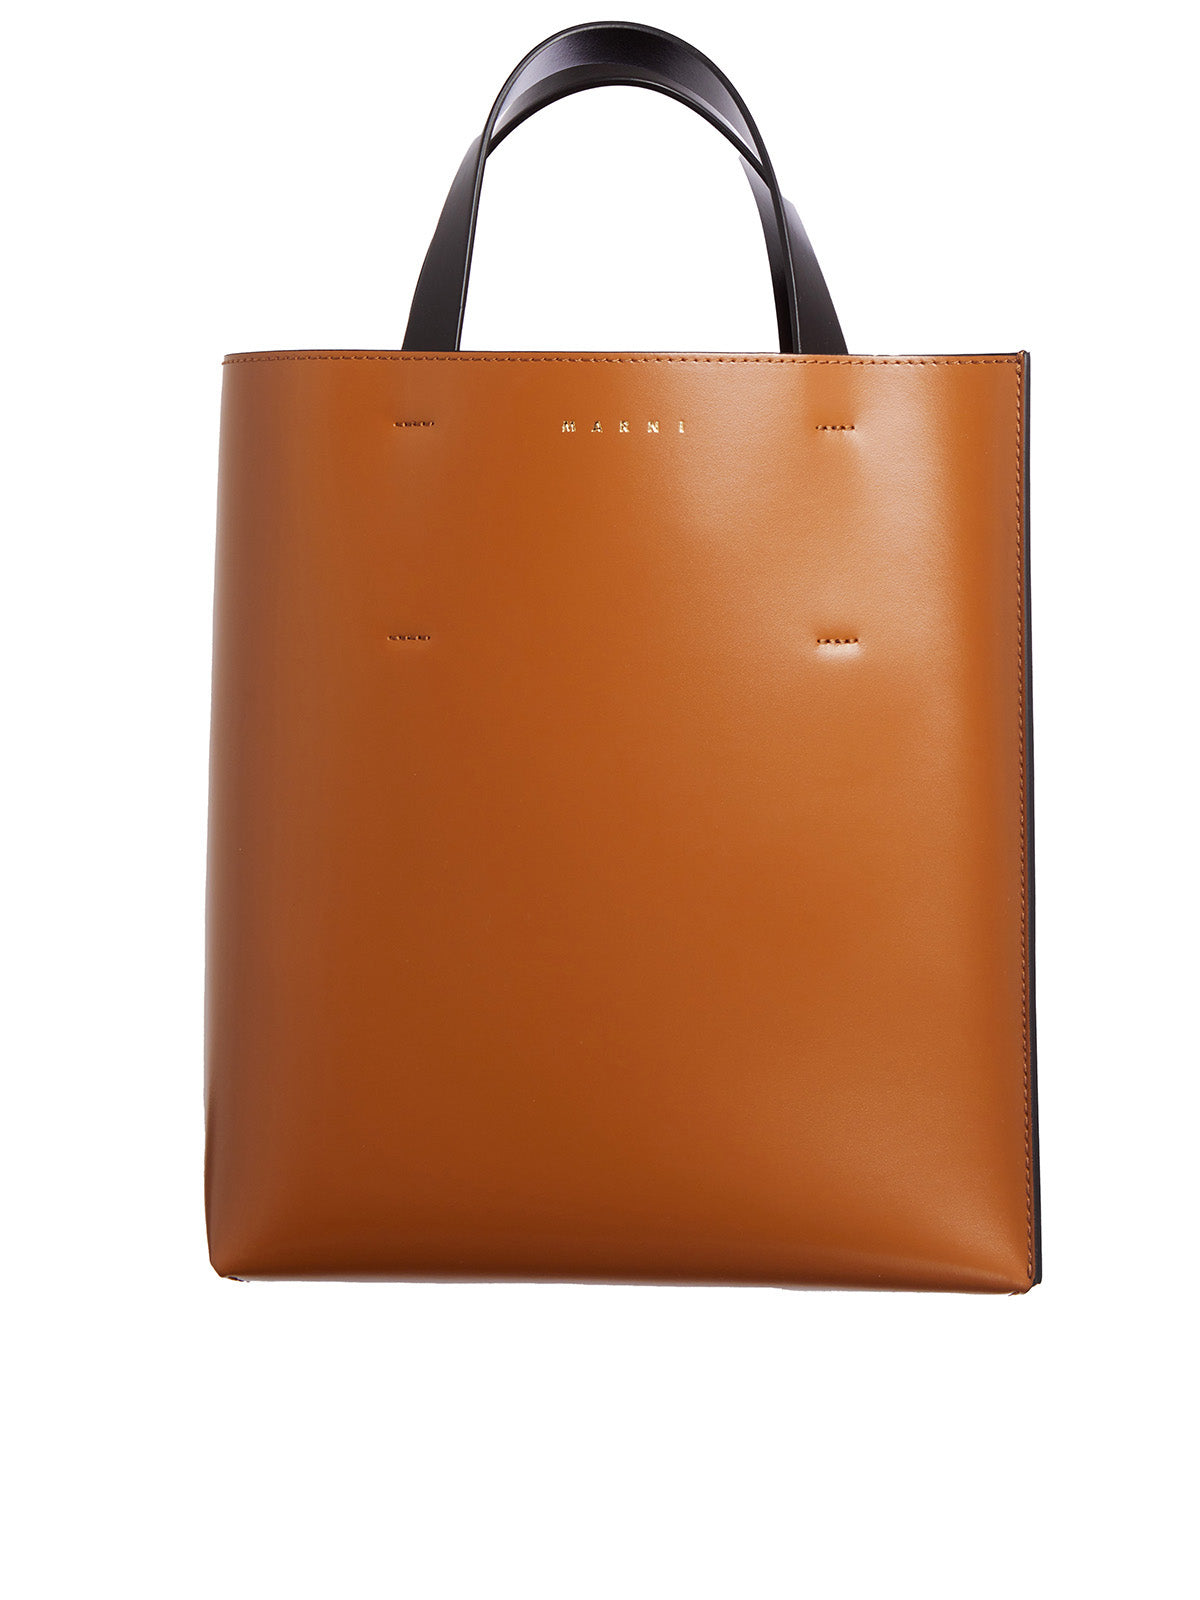 MARNI Brown Logo Shopping Bag with Detachable Strap for Women